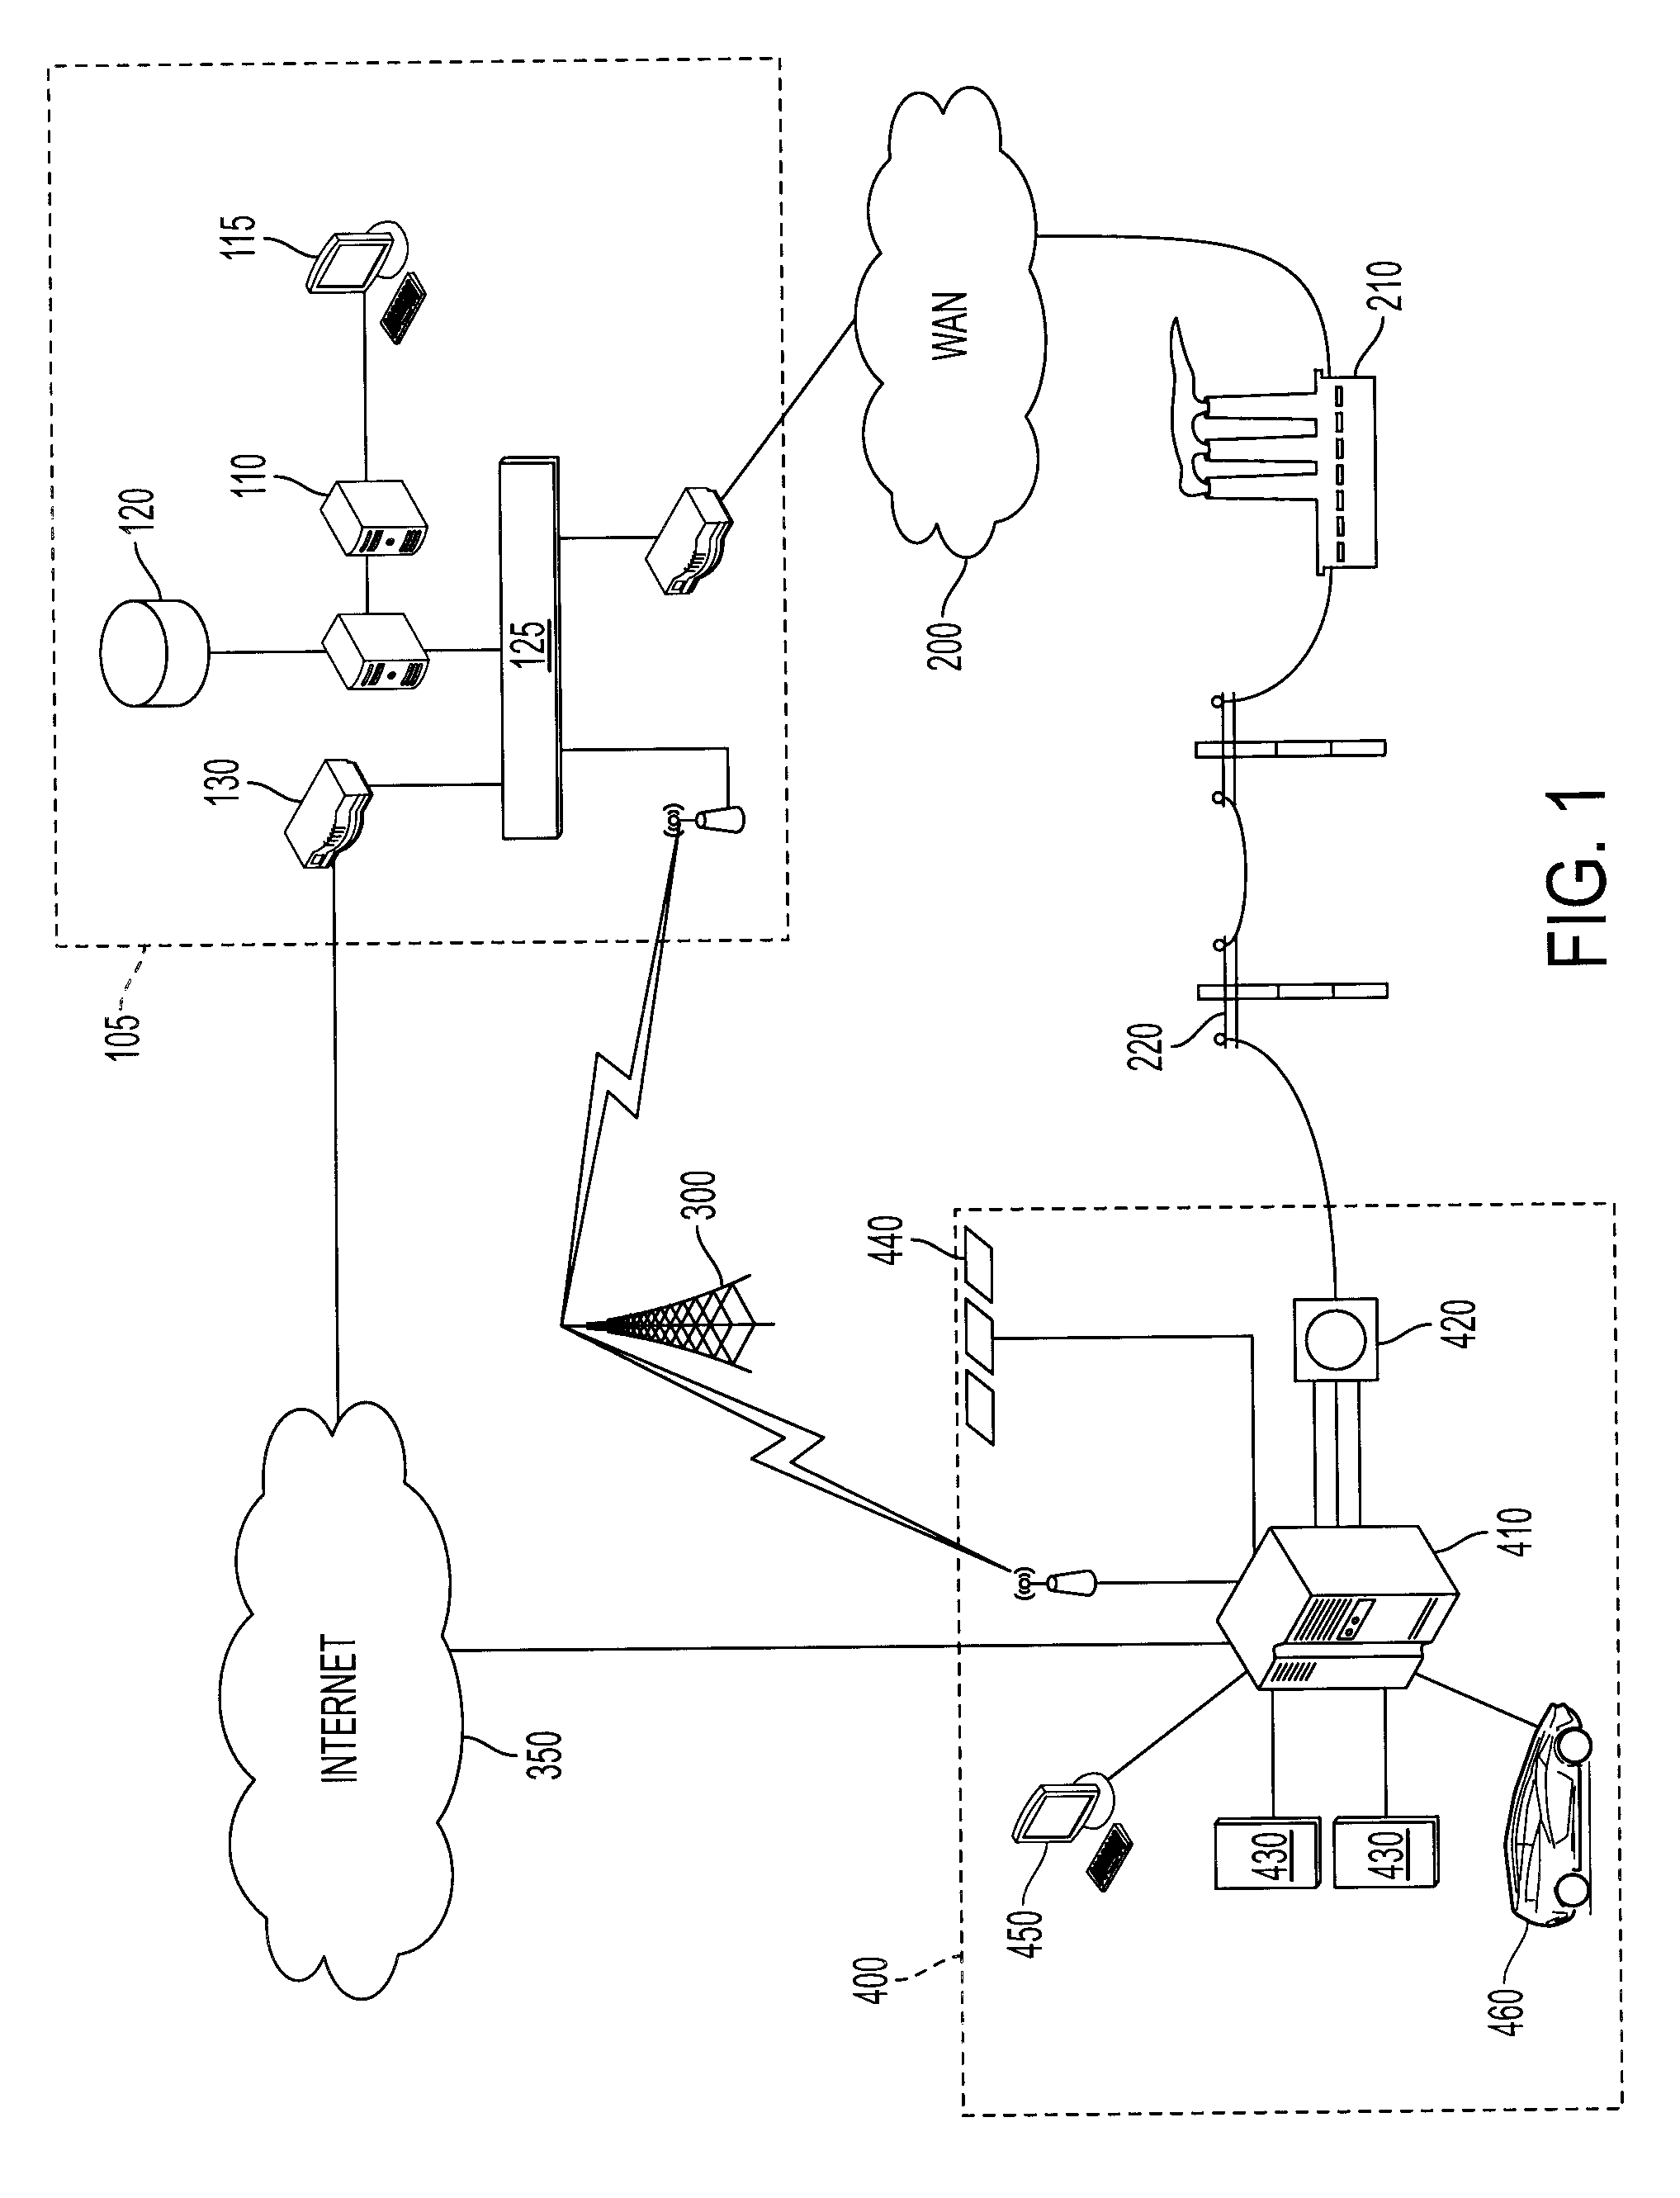 Method and system for scheduling the discharge of distributed power storage devices and for levelizing dispatch participation